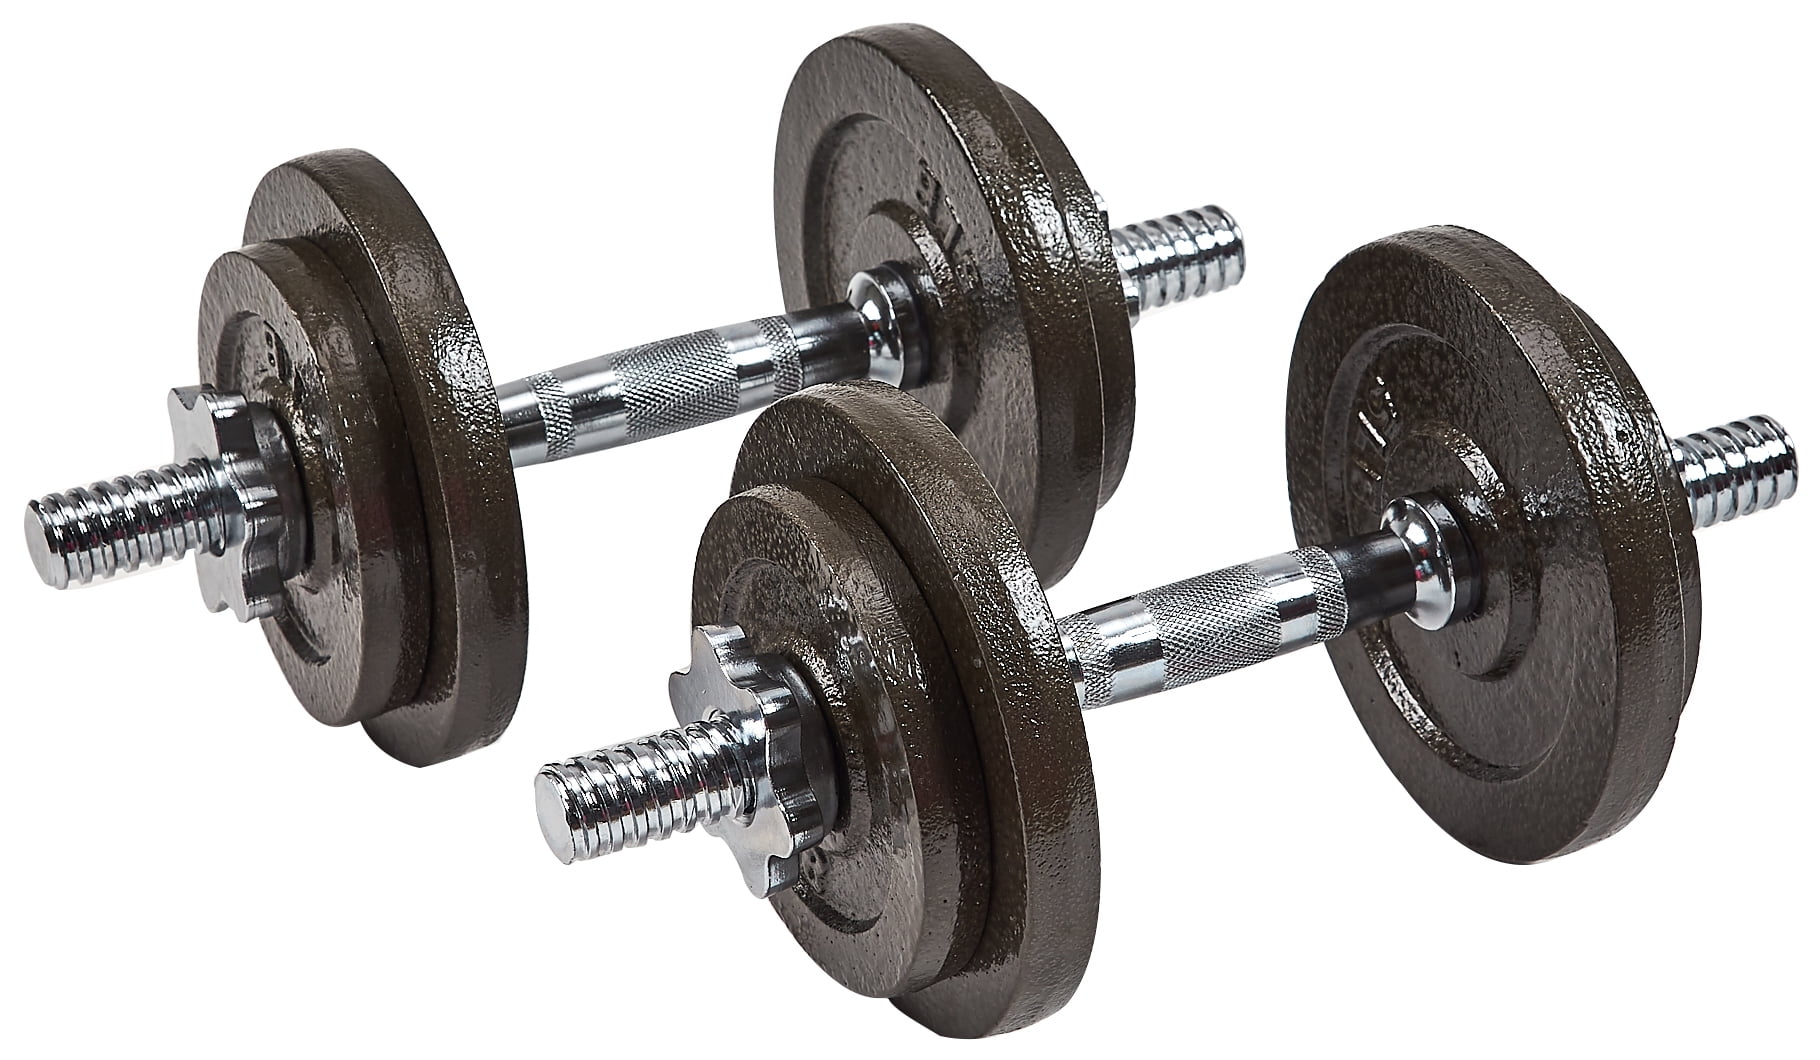 Details about   Totall 44-66 LB Weight Dumbbell Adjustable Cap Gym Barbell Plates Body Workout 